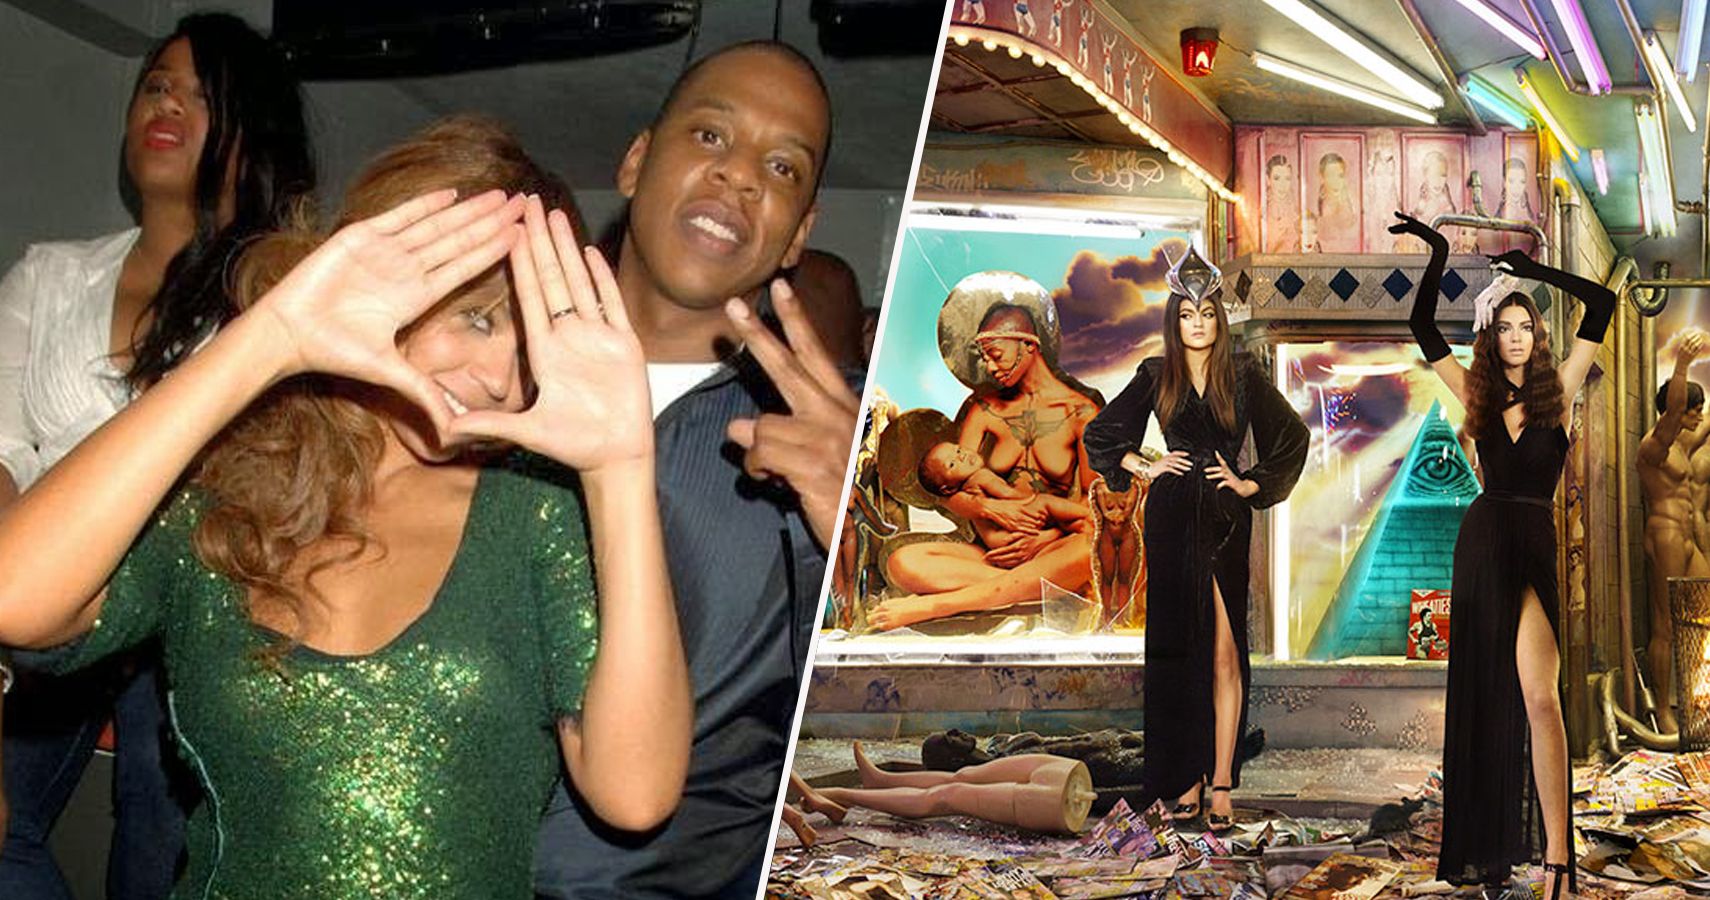 20 Celeb Photos That Show Maybe The Illuminati Is Real